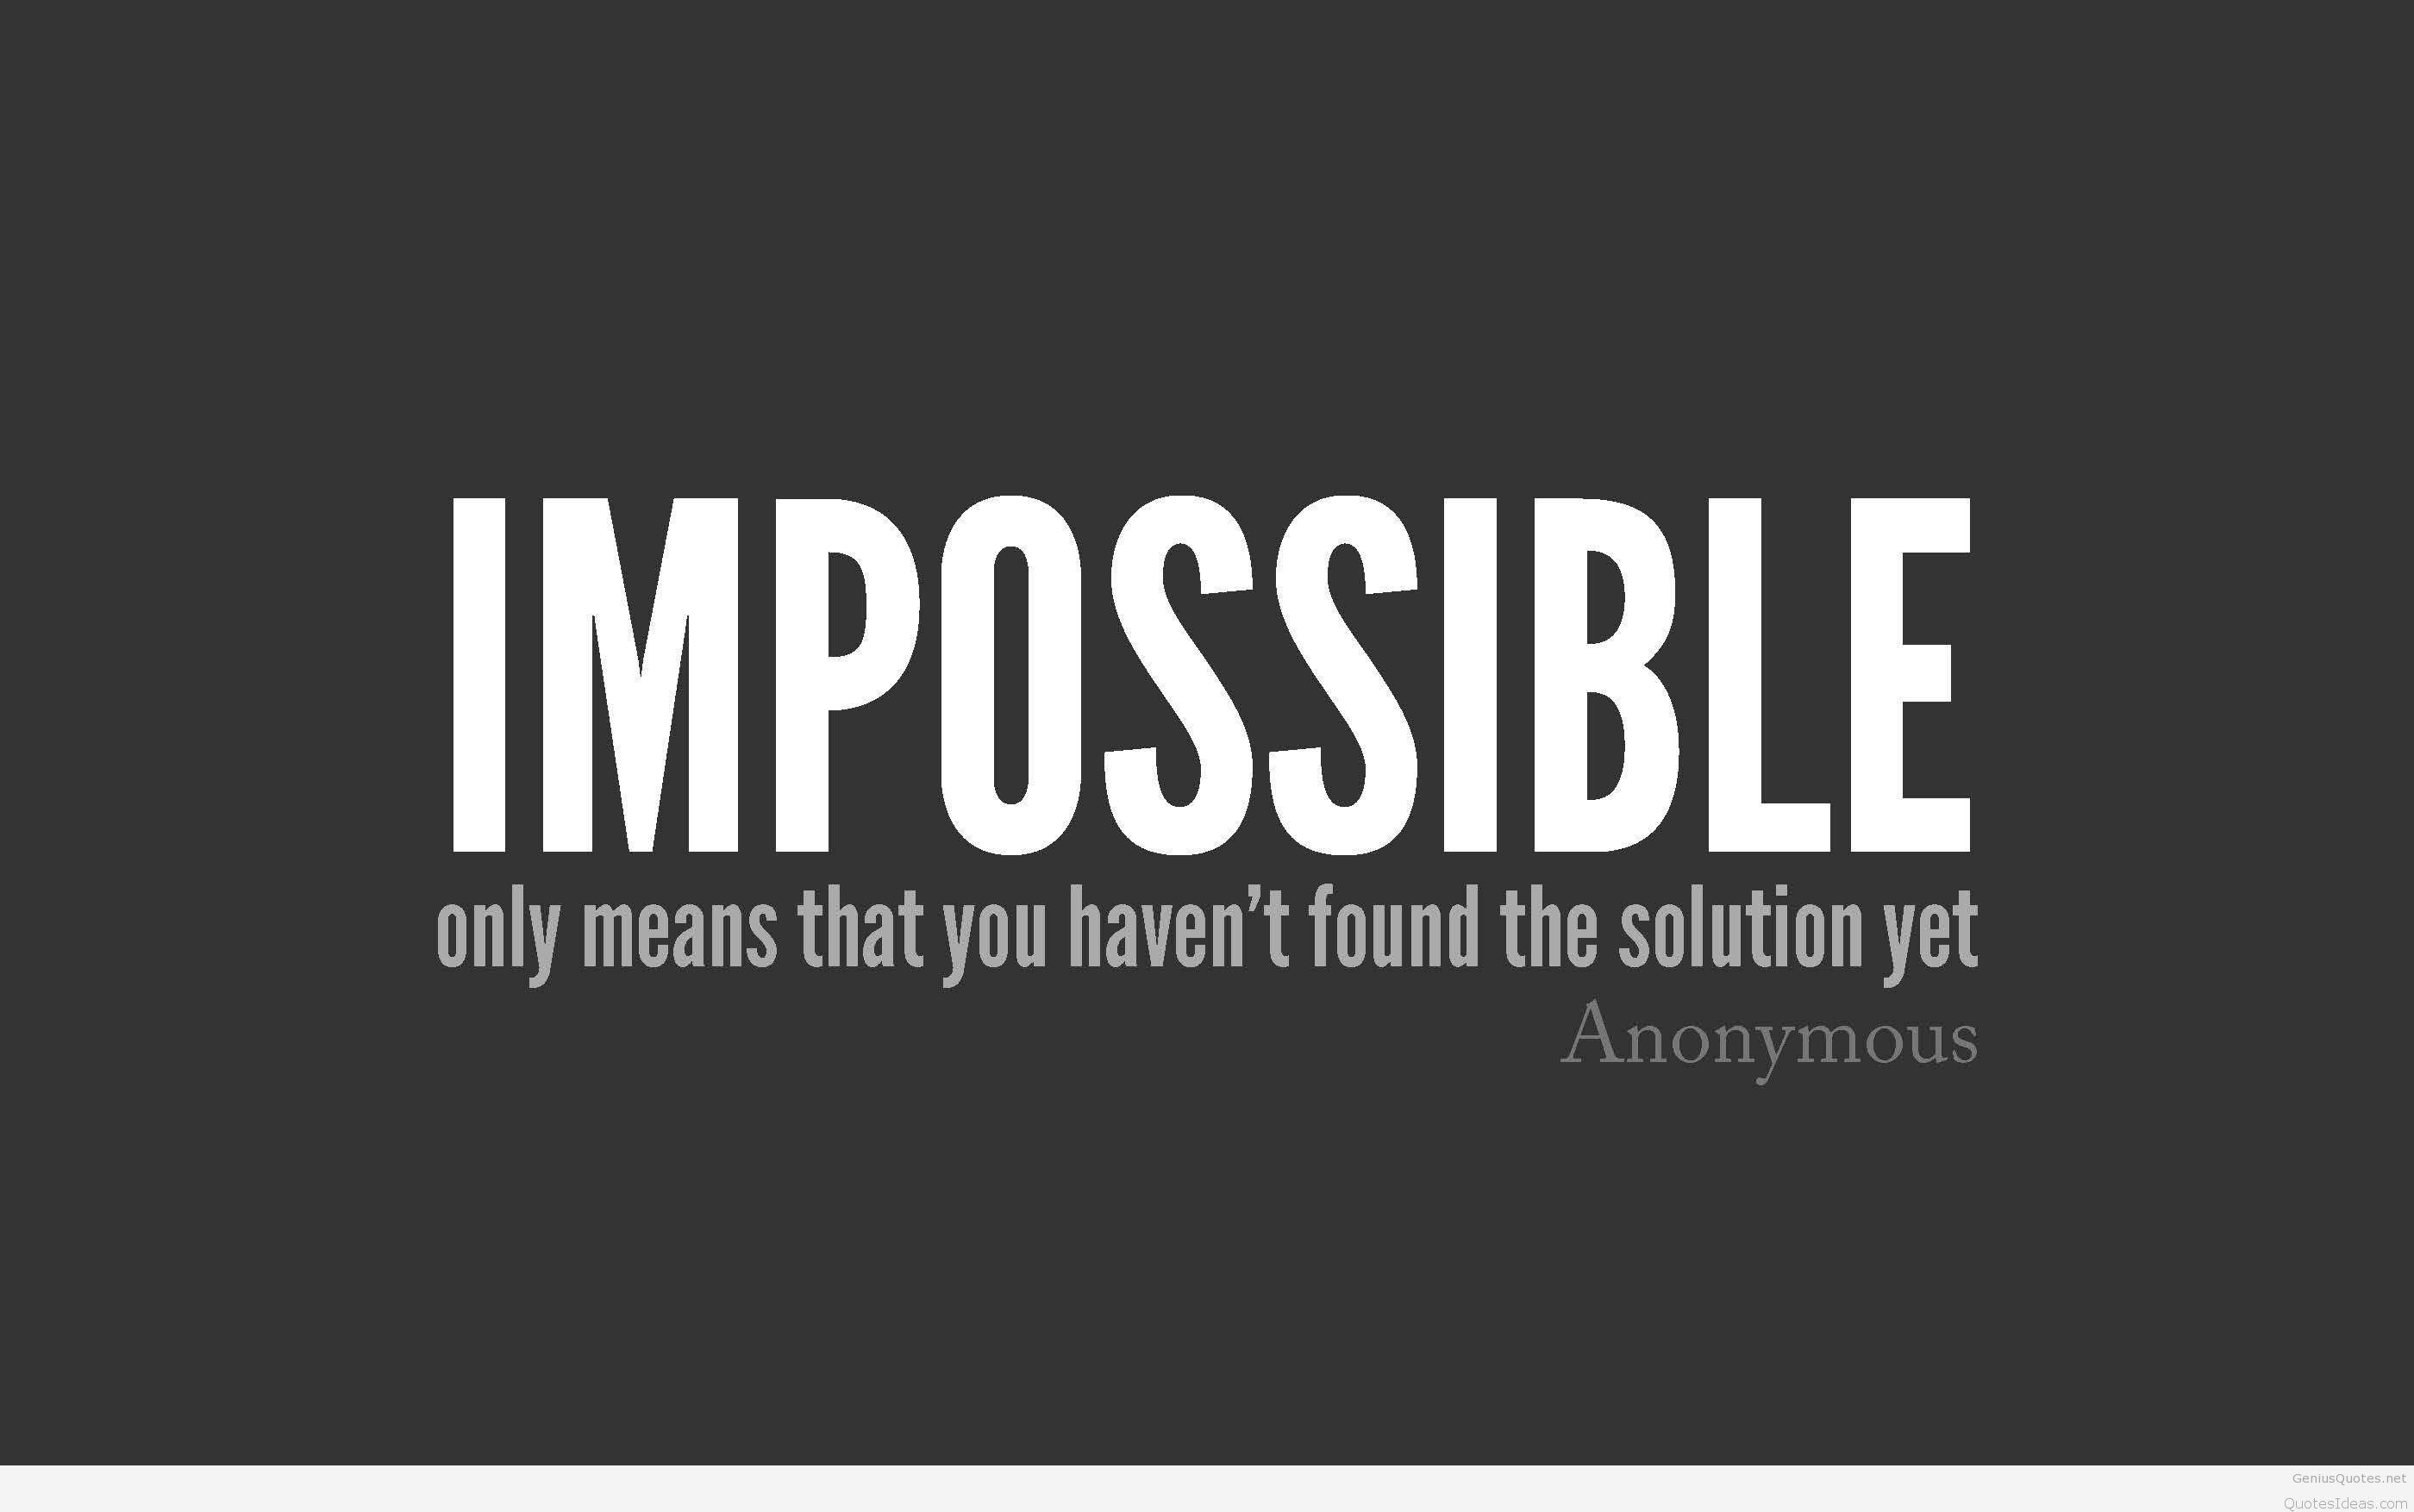 Wallpaper business impossible quote hd